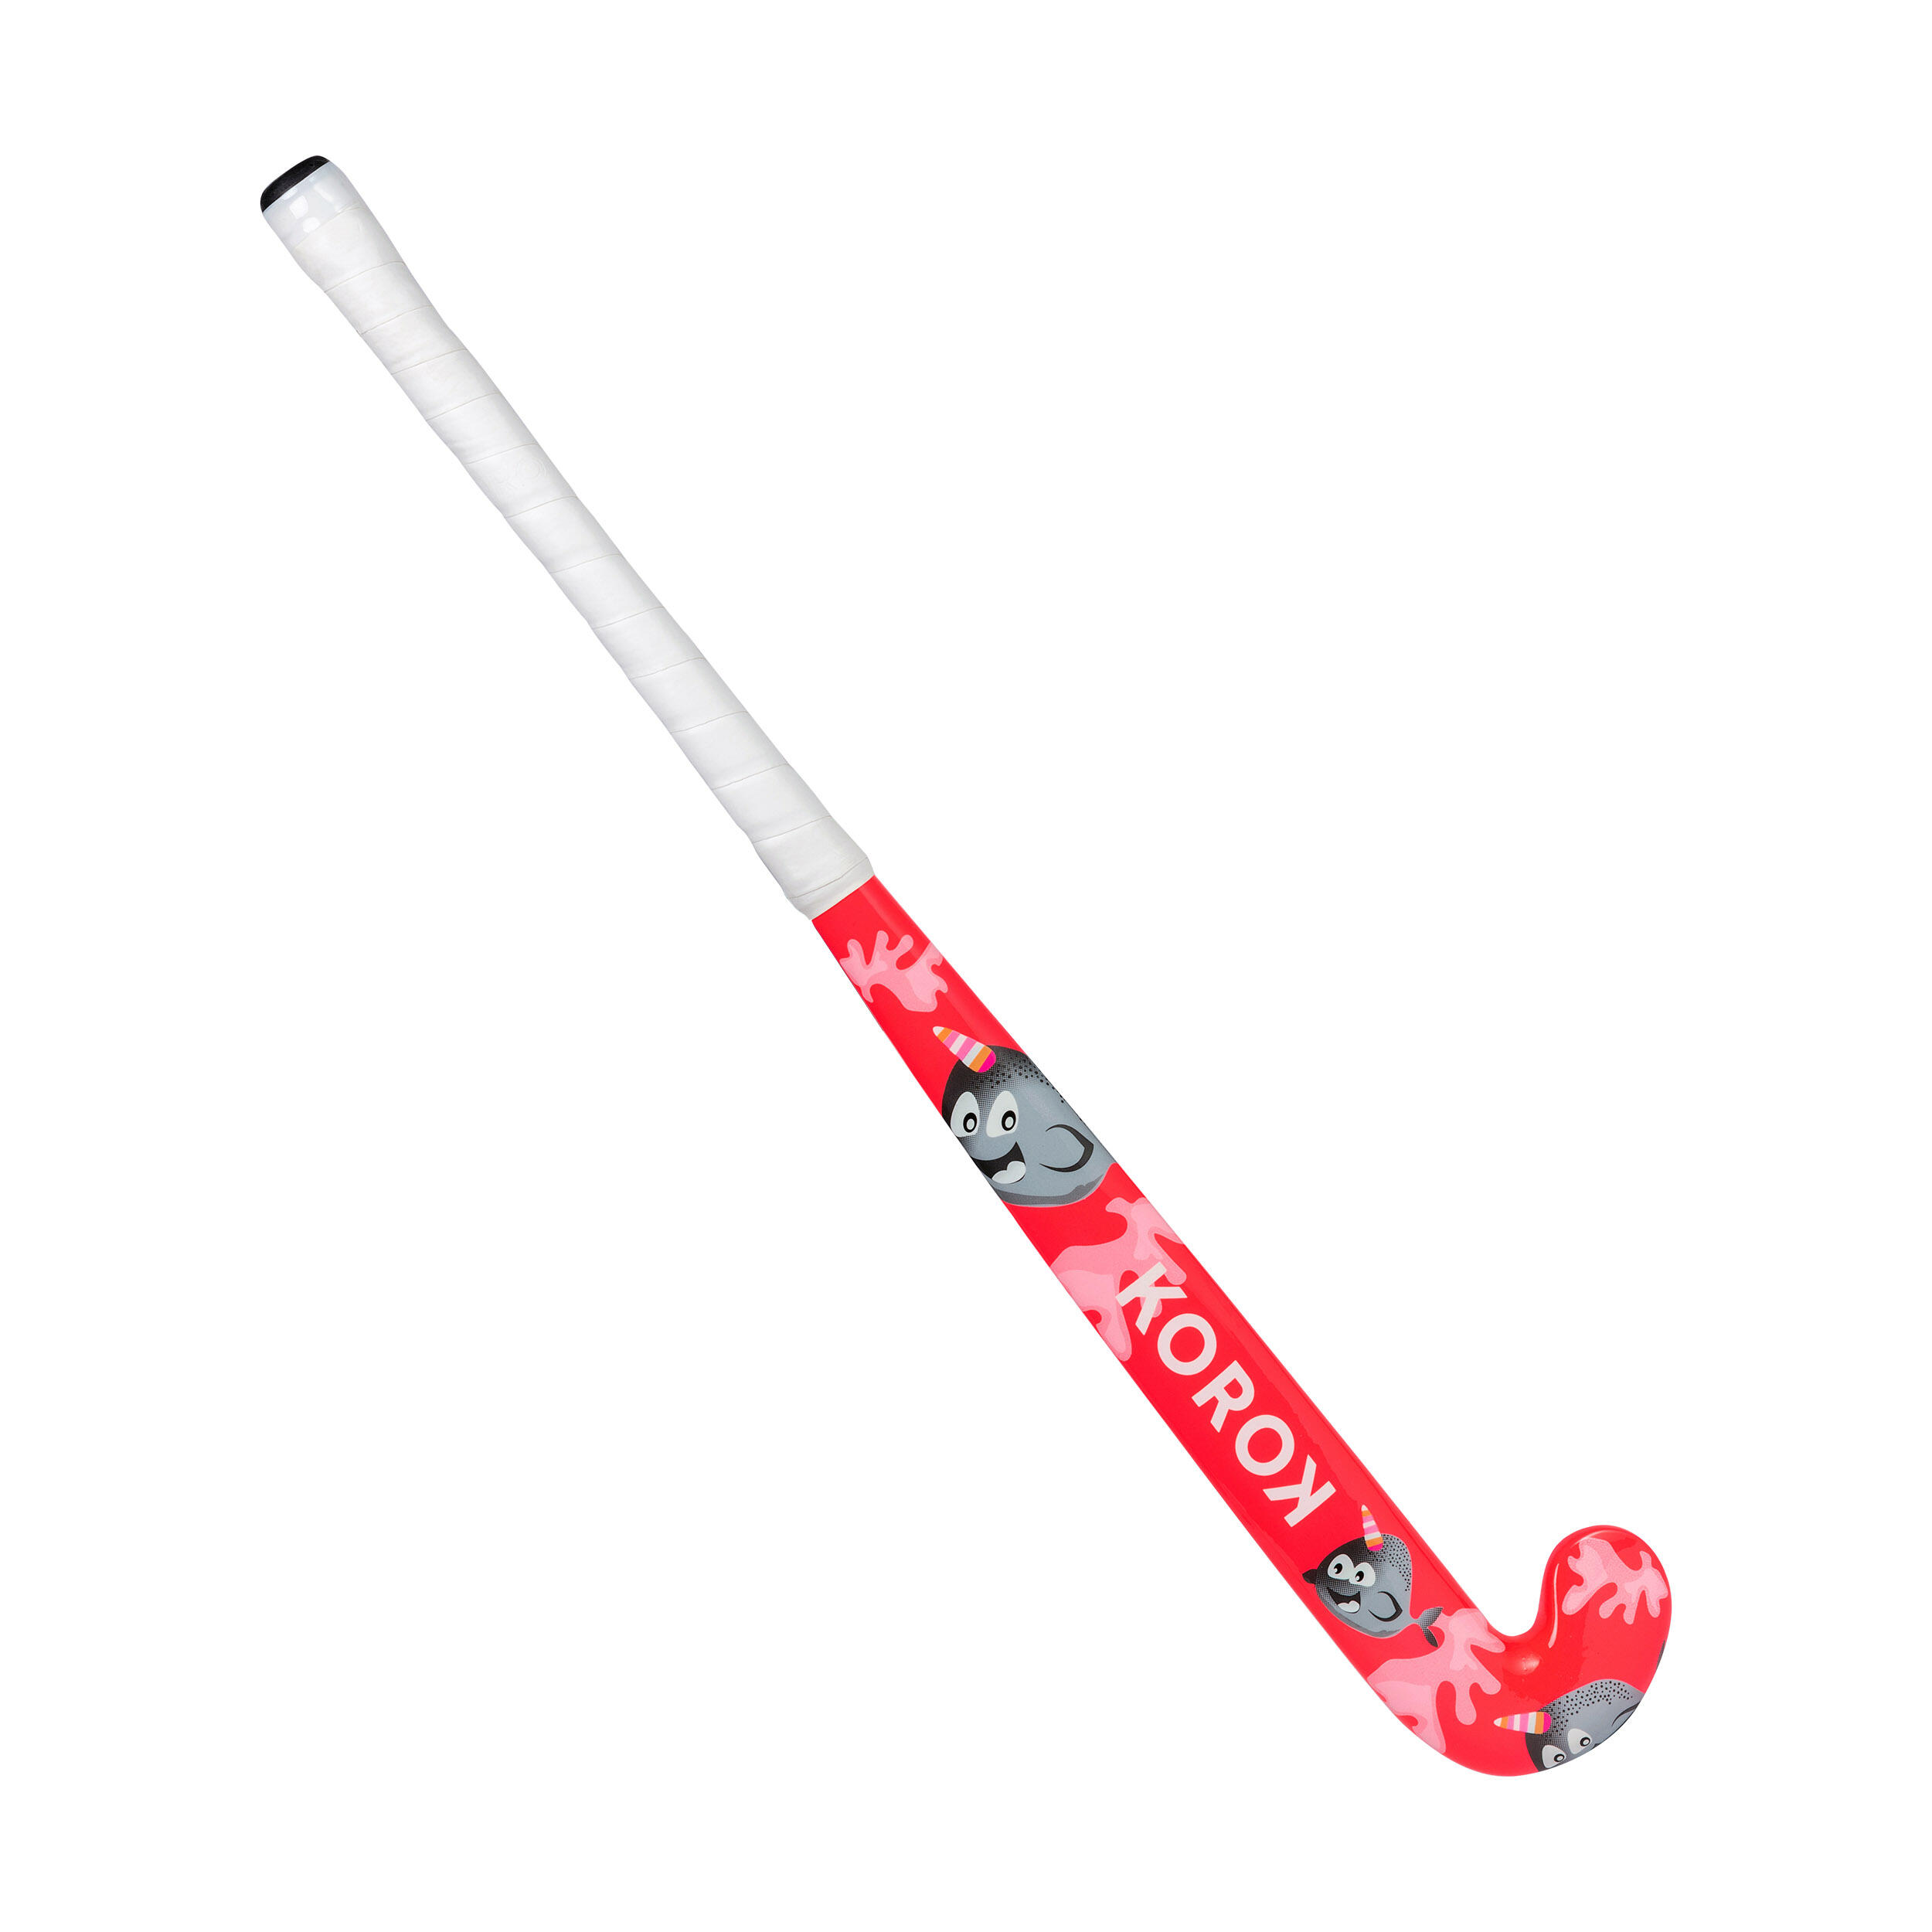 Kids' Wood Field Hockey Stick FH100 - Narwhal 8/11